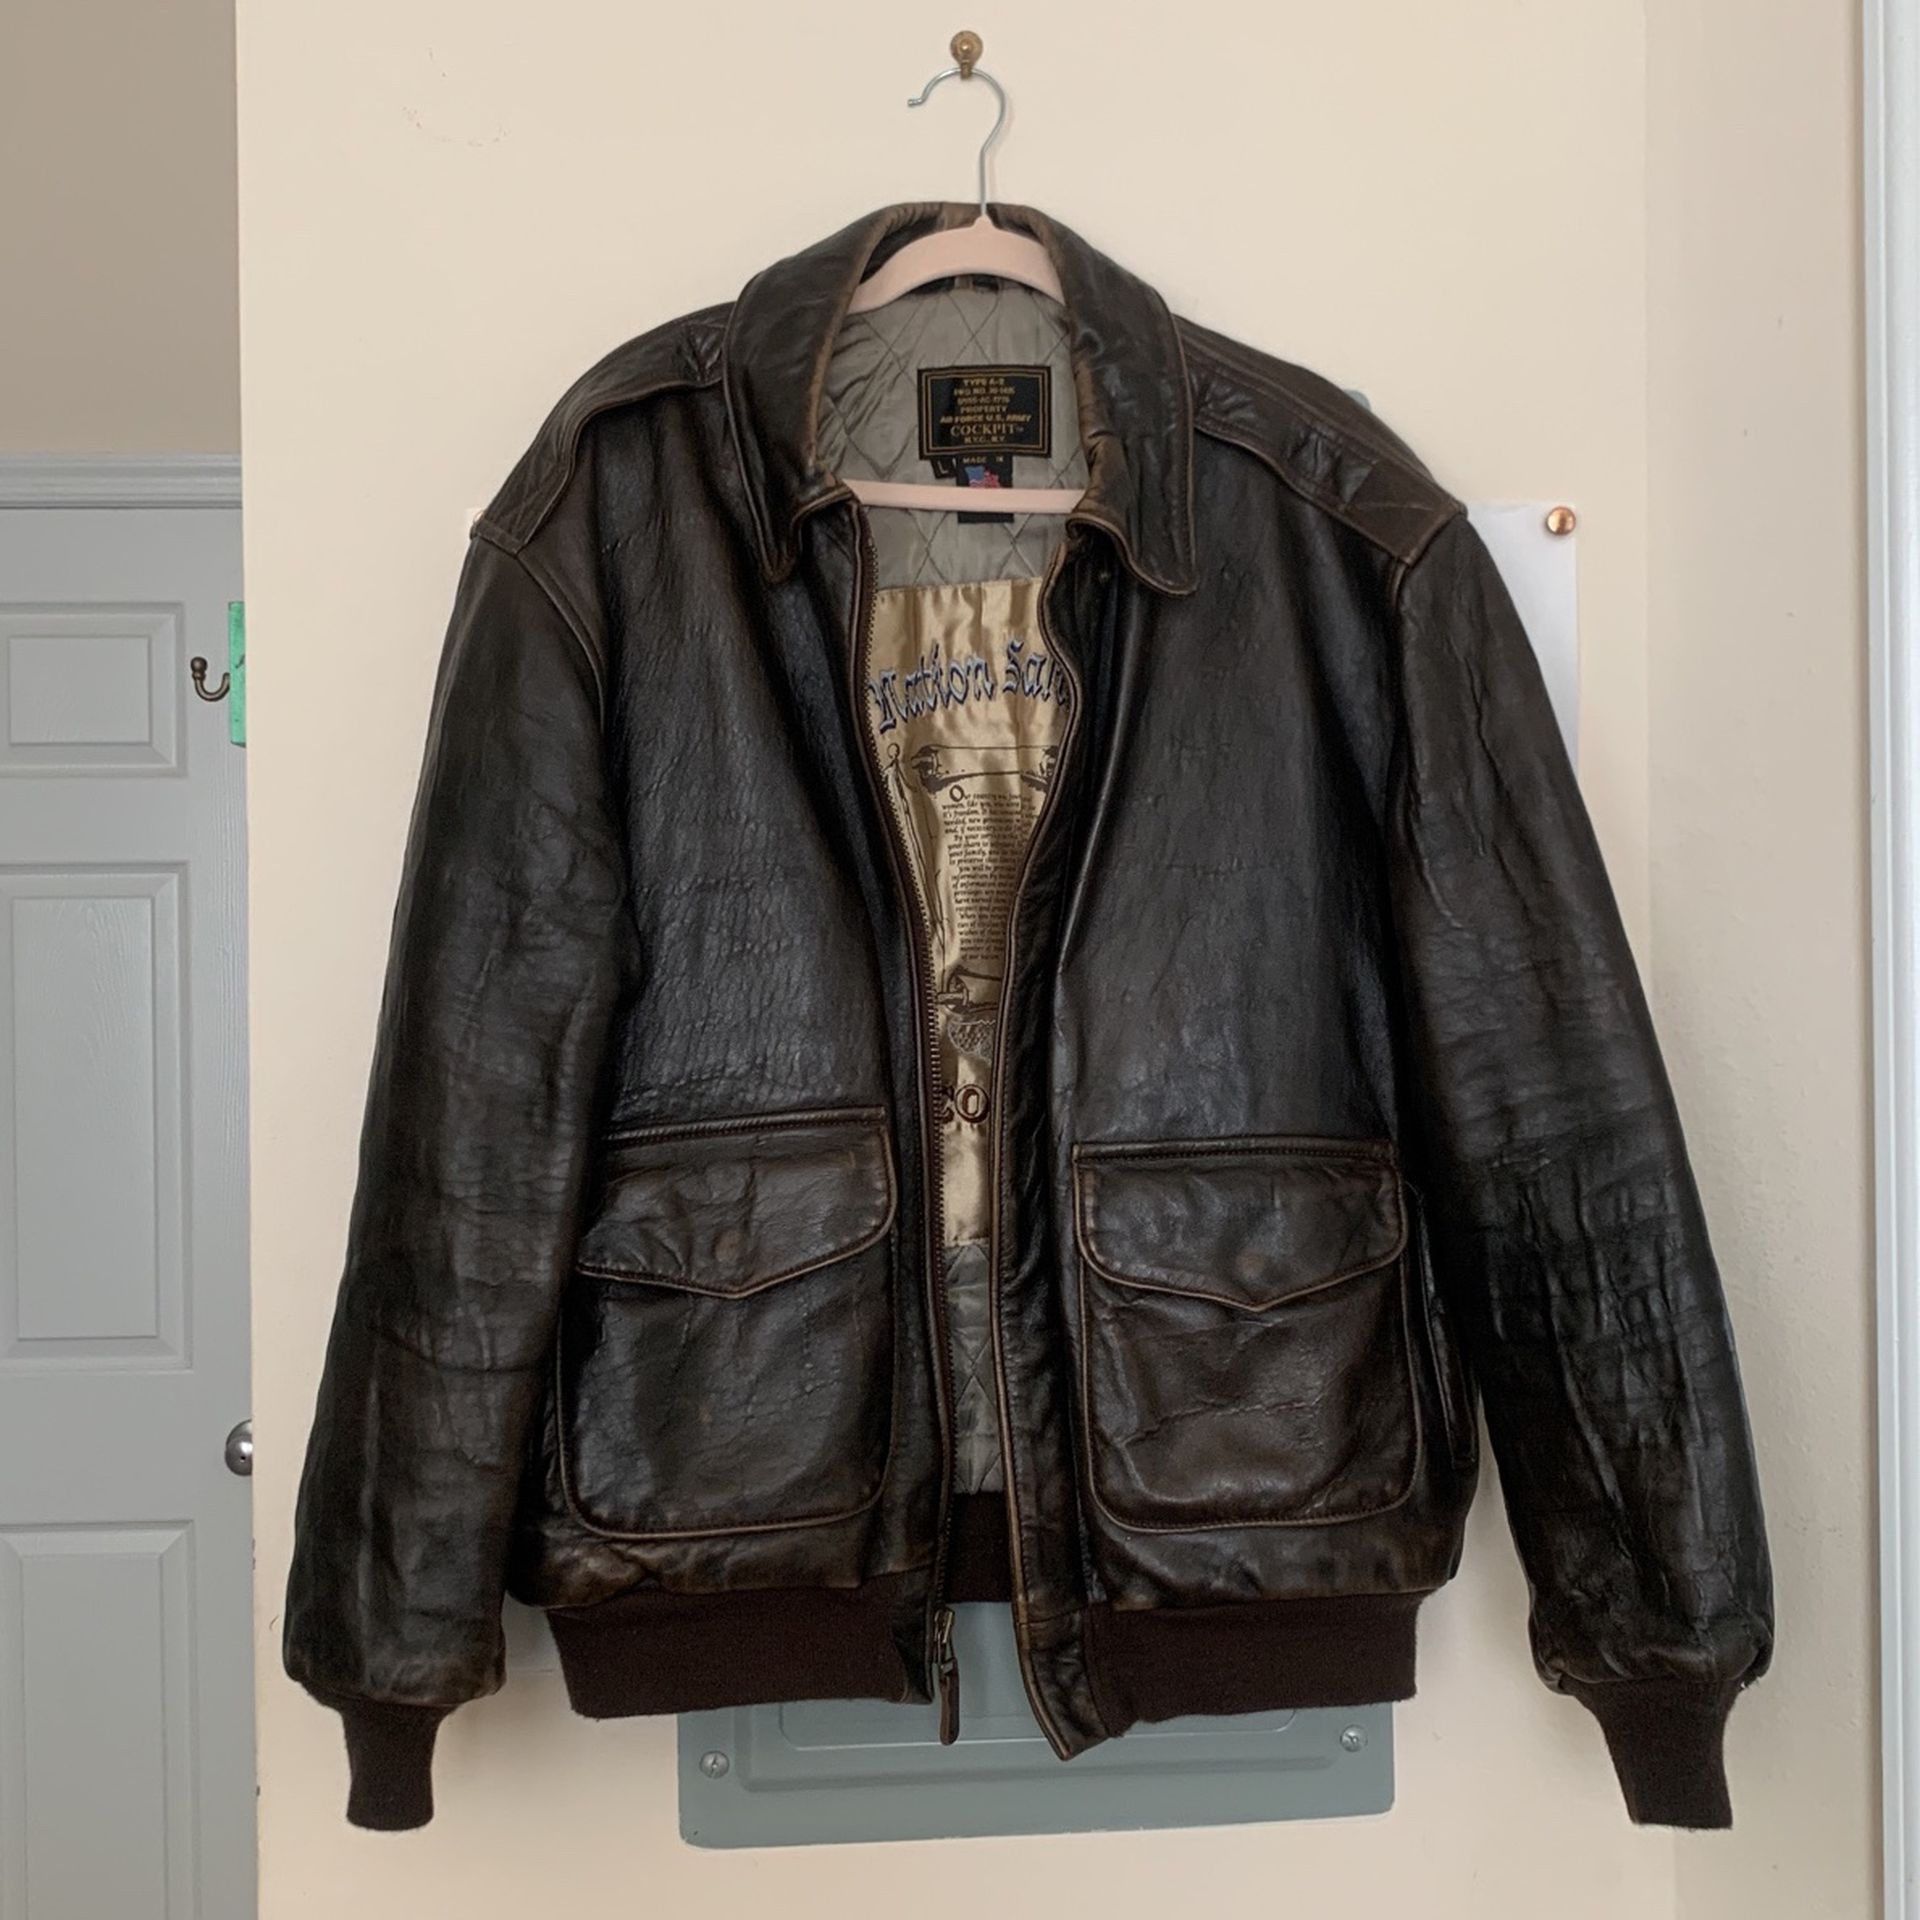 Authentic US Airforce/Army Bomber Jacket